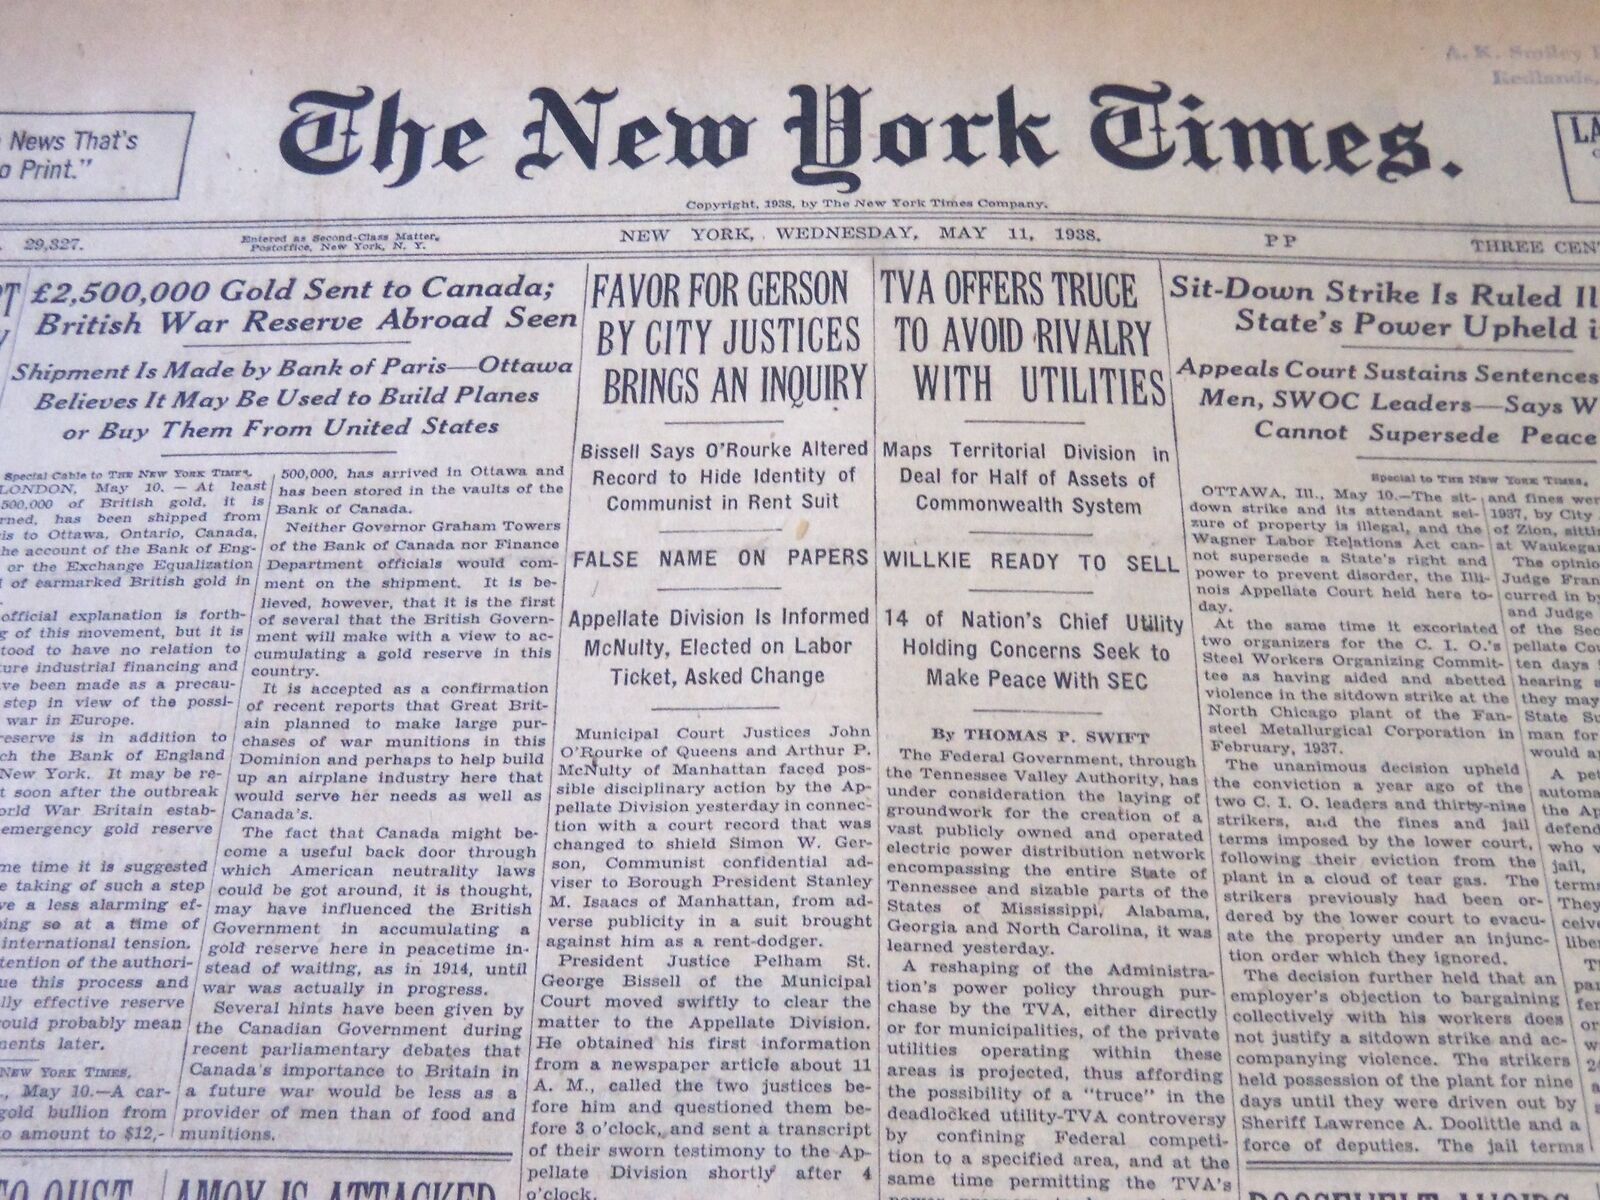 1938 MAY 11 NEW YORK TIMES - TVA OFFERS TRUCE TO AVOID RIVALRY - NT 6263